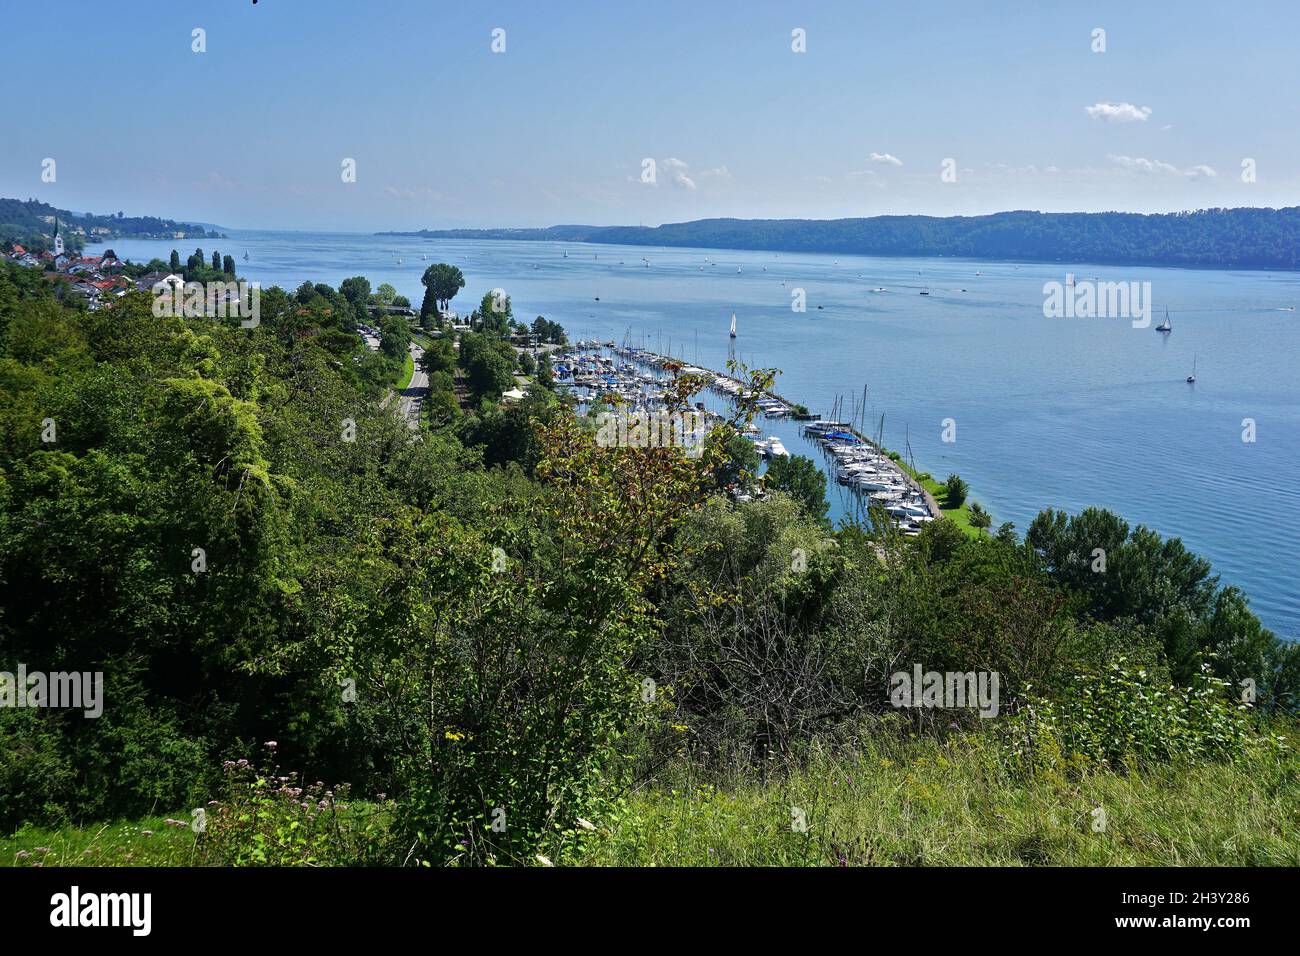 View to the lake constance to the boat harbor of sipplingen Stock Photo